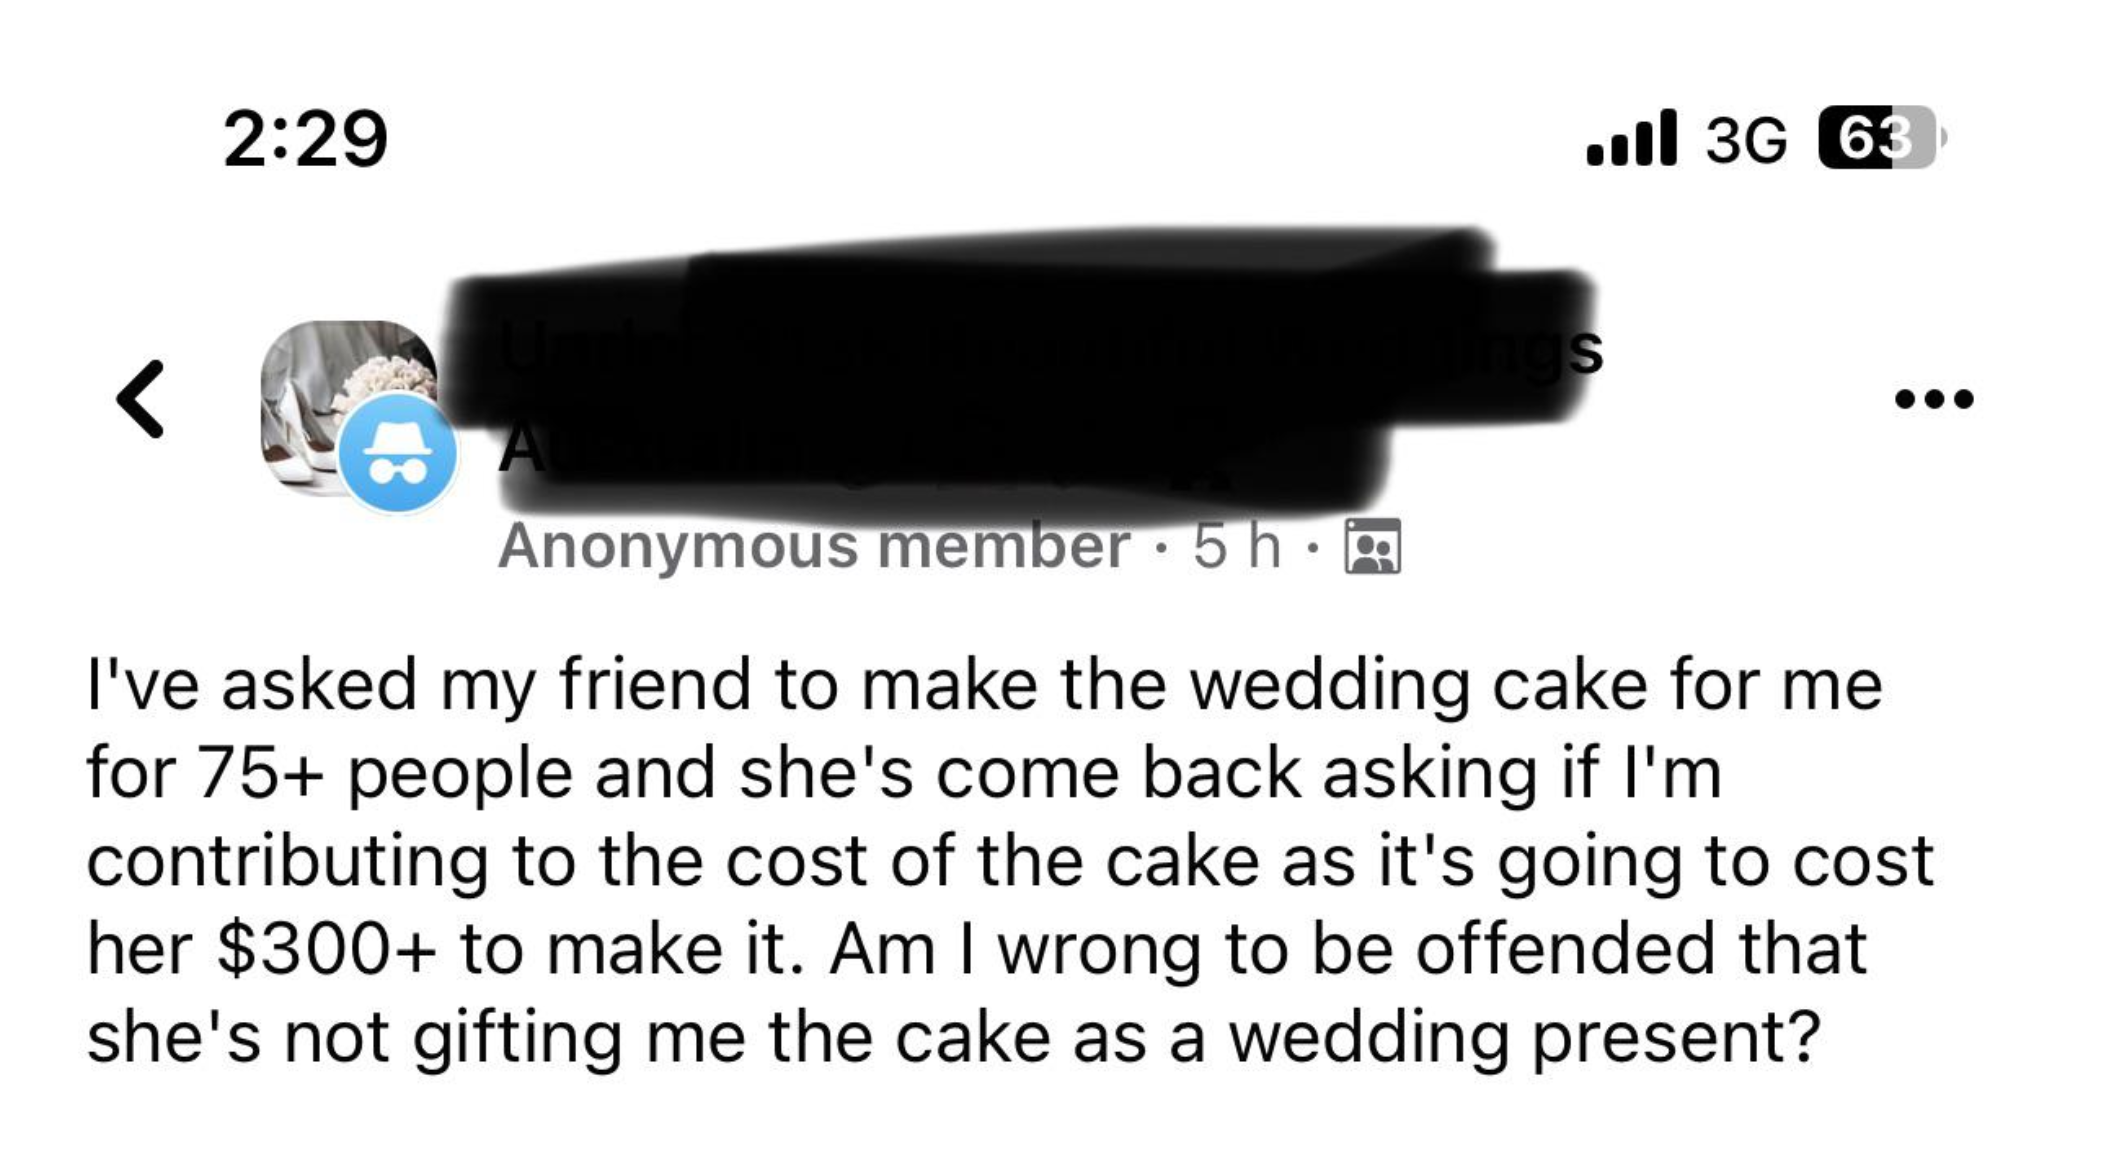 &quot;Am I wrong to be offended that she&#x27;s not gifting me the cake as a wedding present?&quot;